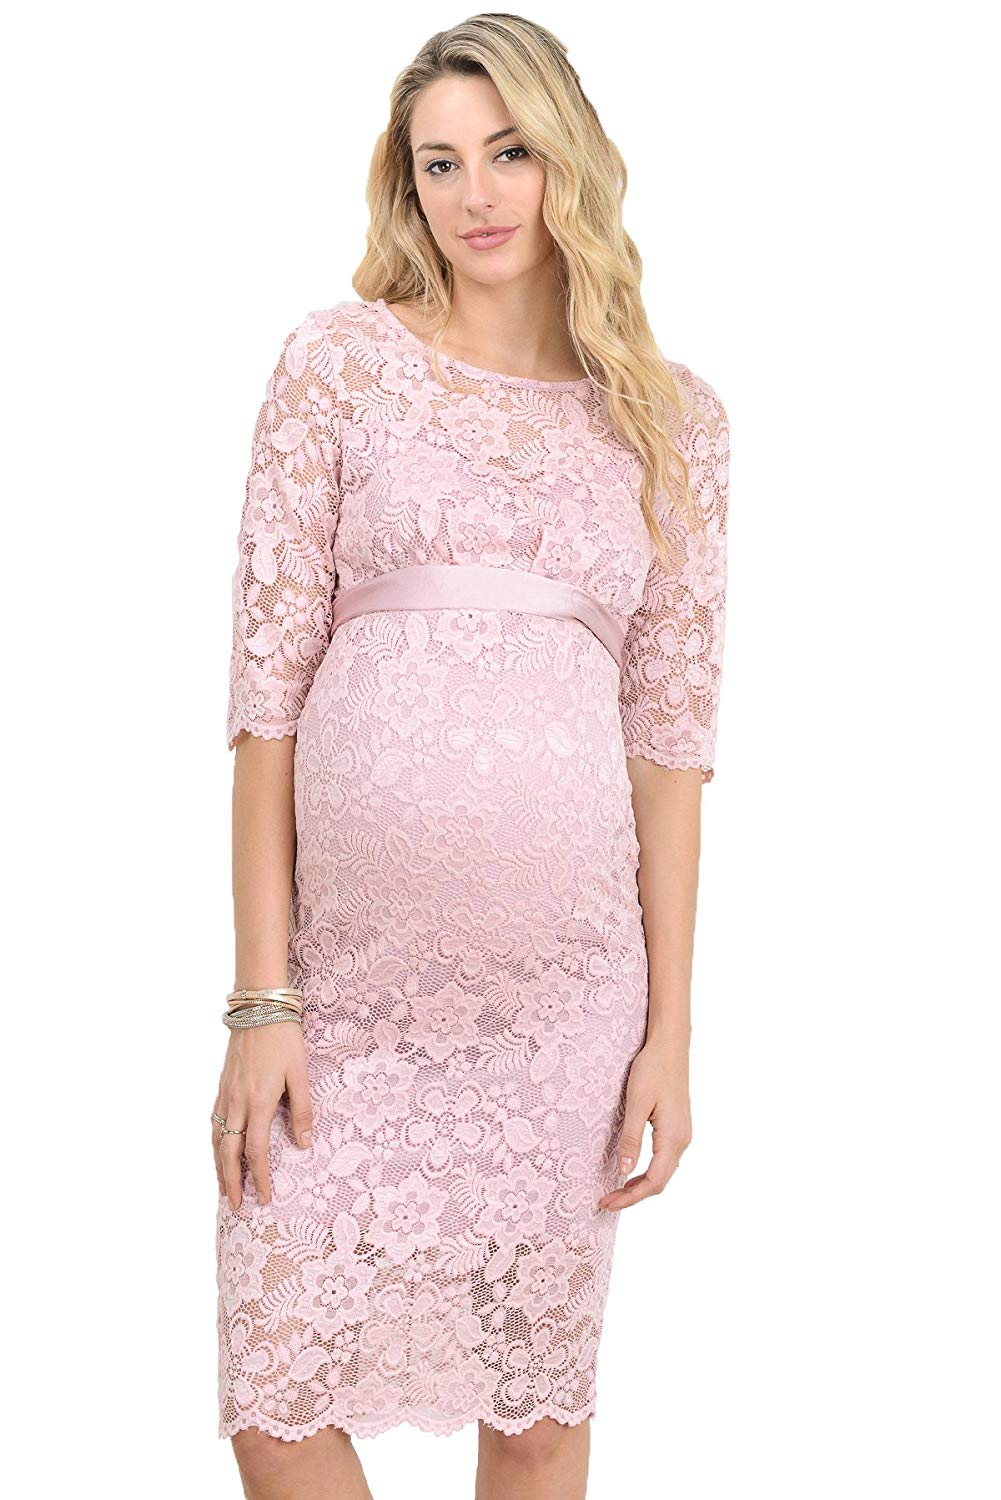 Baby Shower Pink Dress : 5 Beautiful Tips On What To Wear To A Baby ...